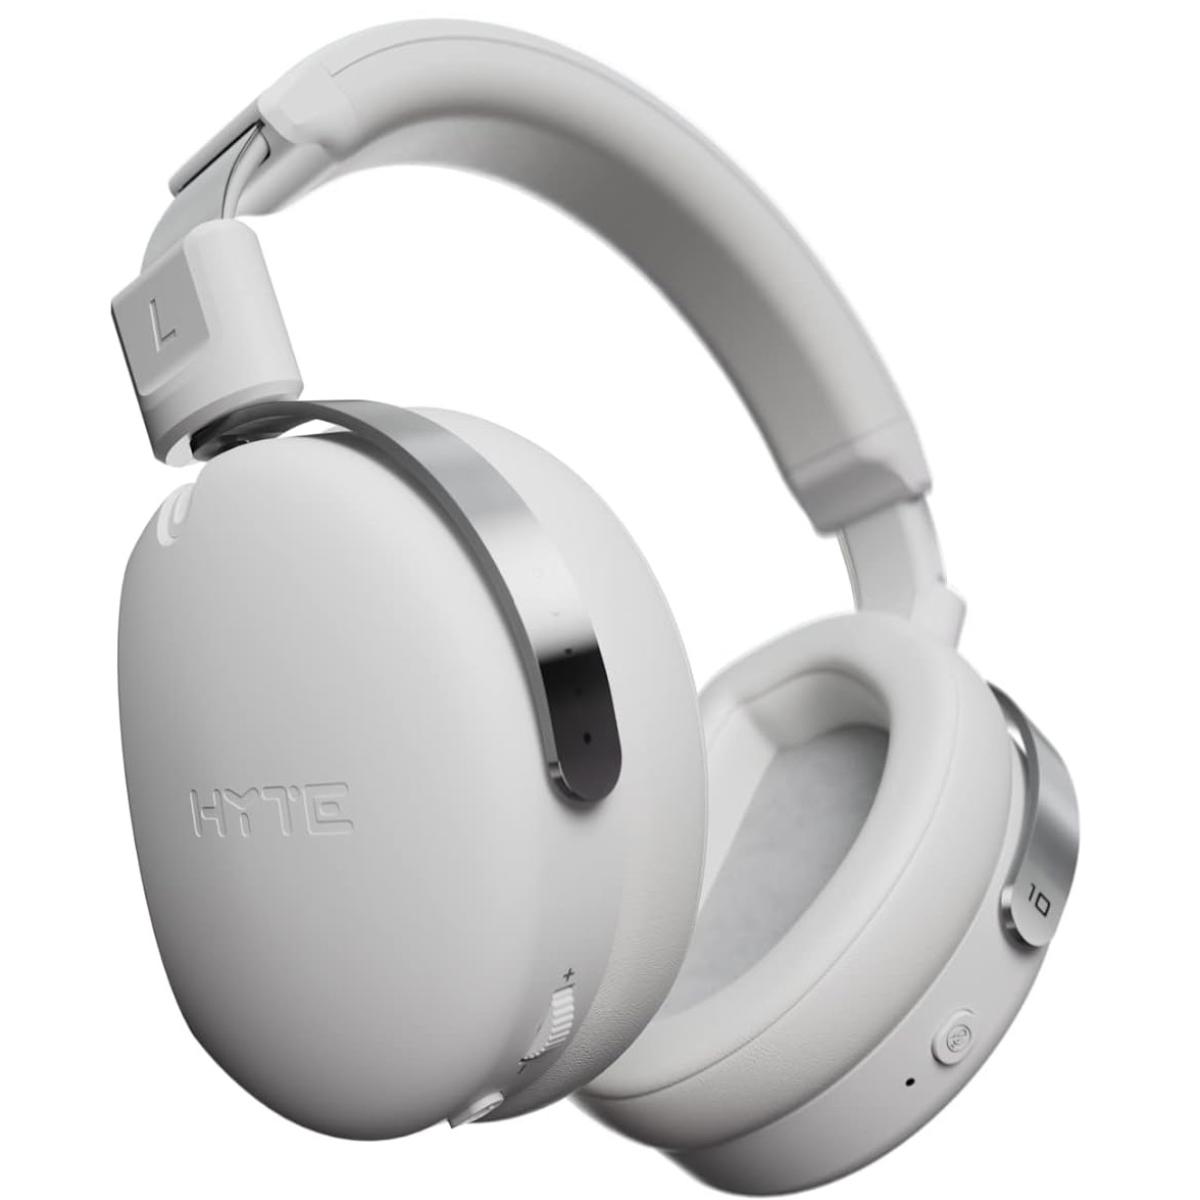 HYTE Eclipse HG10 (2.4GHz) Wireless Gaming Headset, USB Type-A to Type-C Charging, To 30 Hour Battery Life, Removable Unidirectional Mic, MultiPlatform Support: PC/Mac, PlayStation 4/5, Nintendo Switch - Matte White